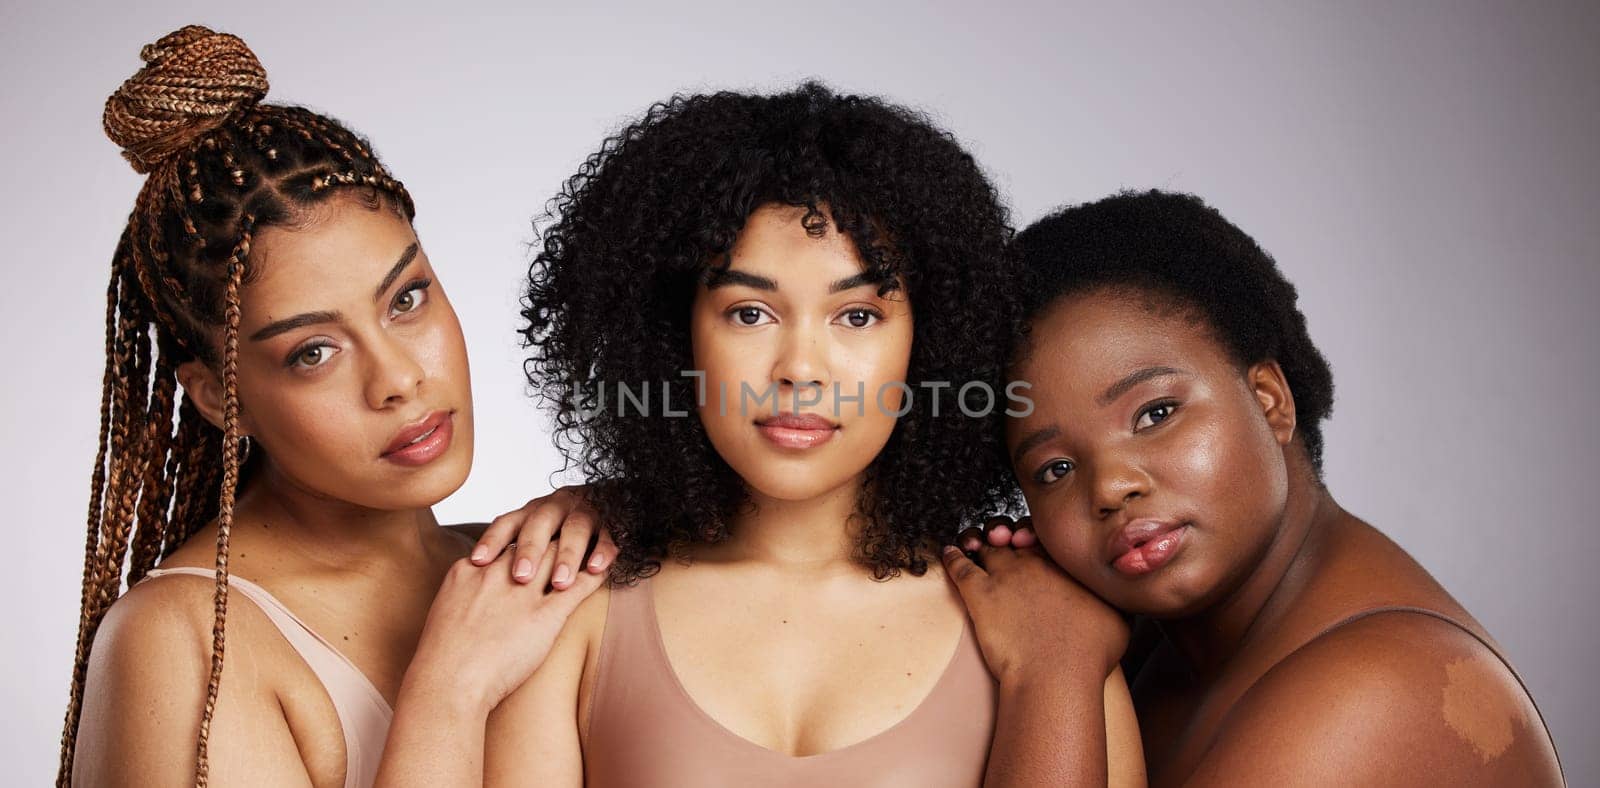 Portrait, skincare and diversity with woman friends in studio on a gray background together for beauty. Face, makeup and natural with a female model group posing to promote support or inclusion.